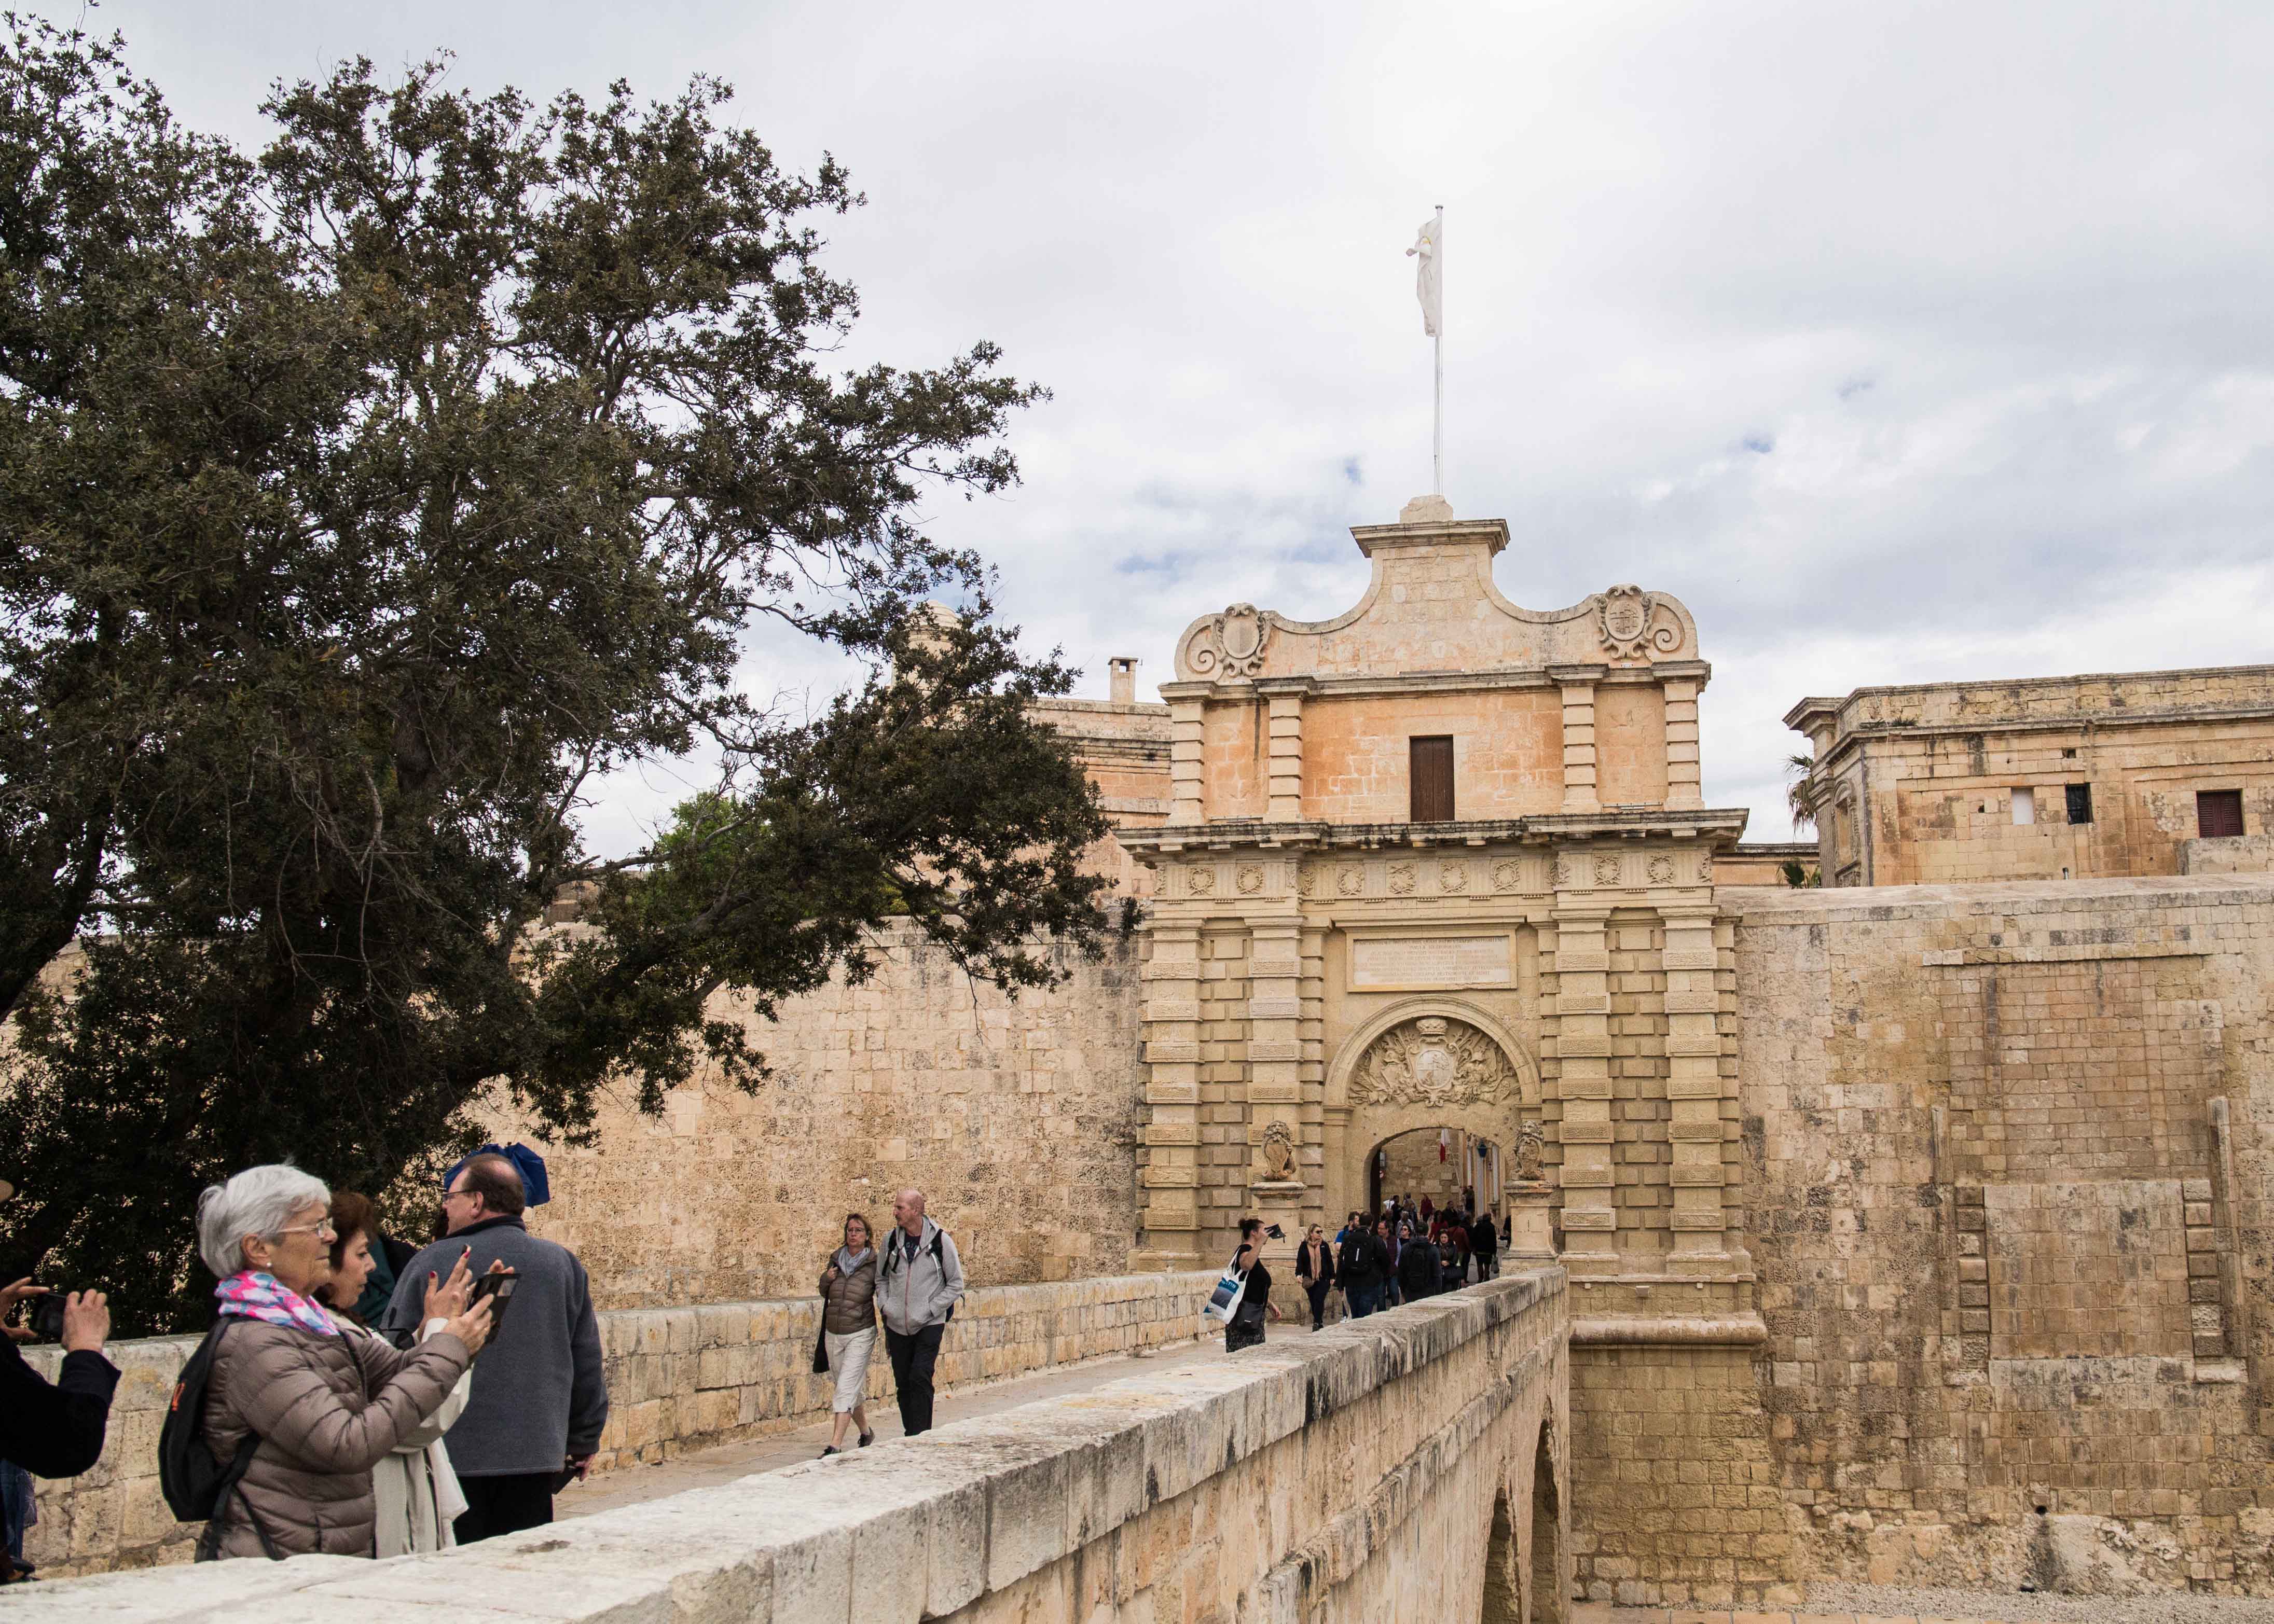 Where to visit in Malta? Mdina Gate, the Silent City